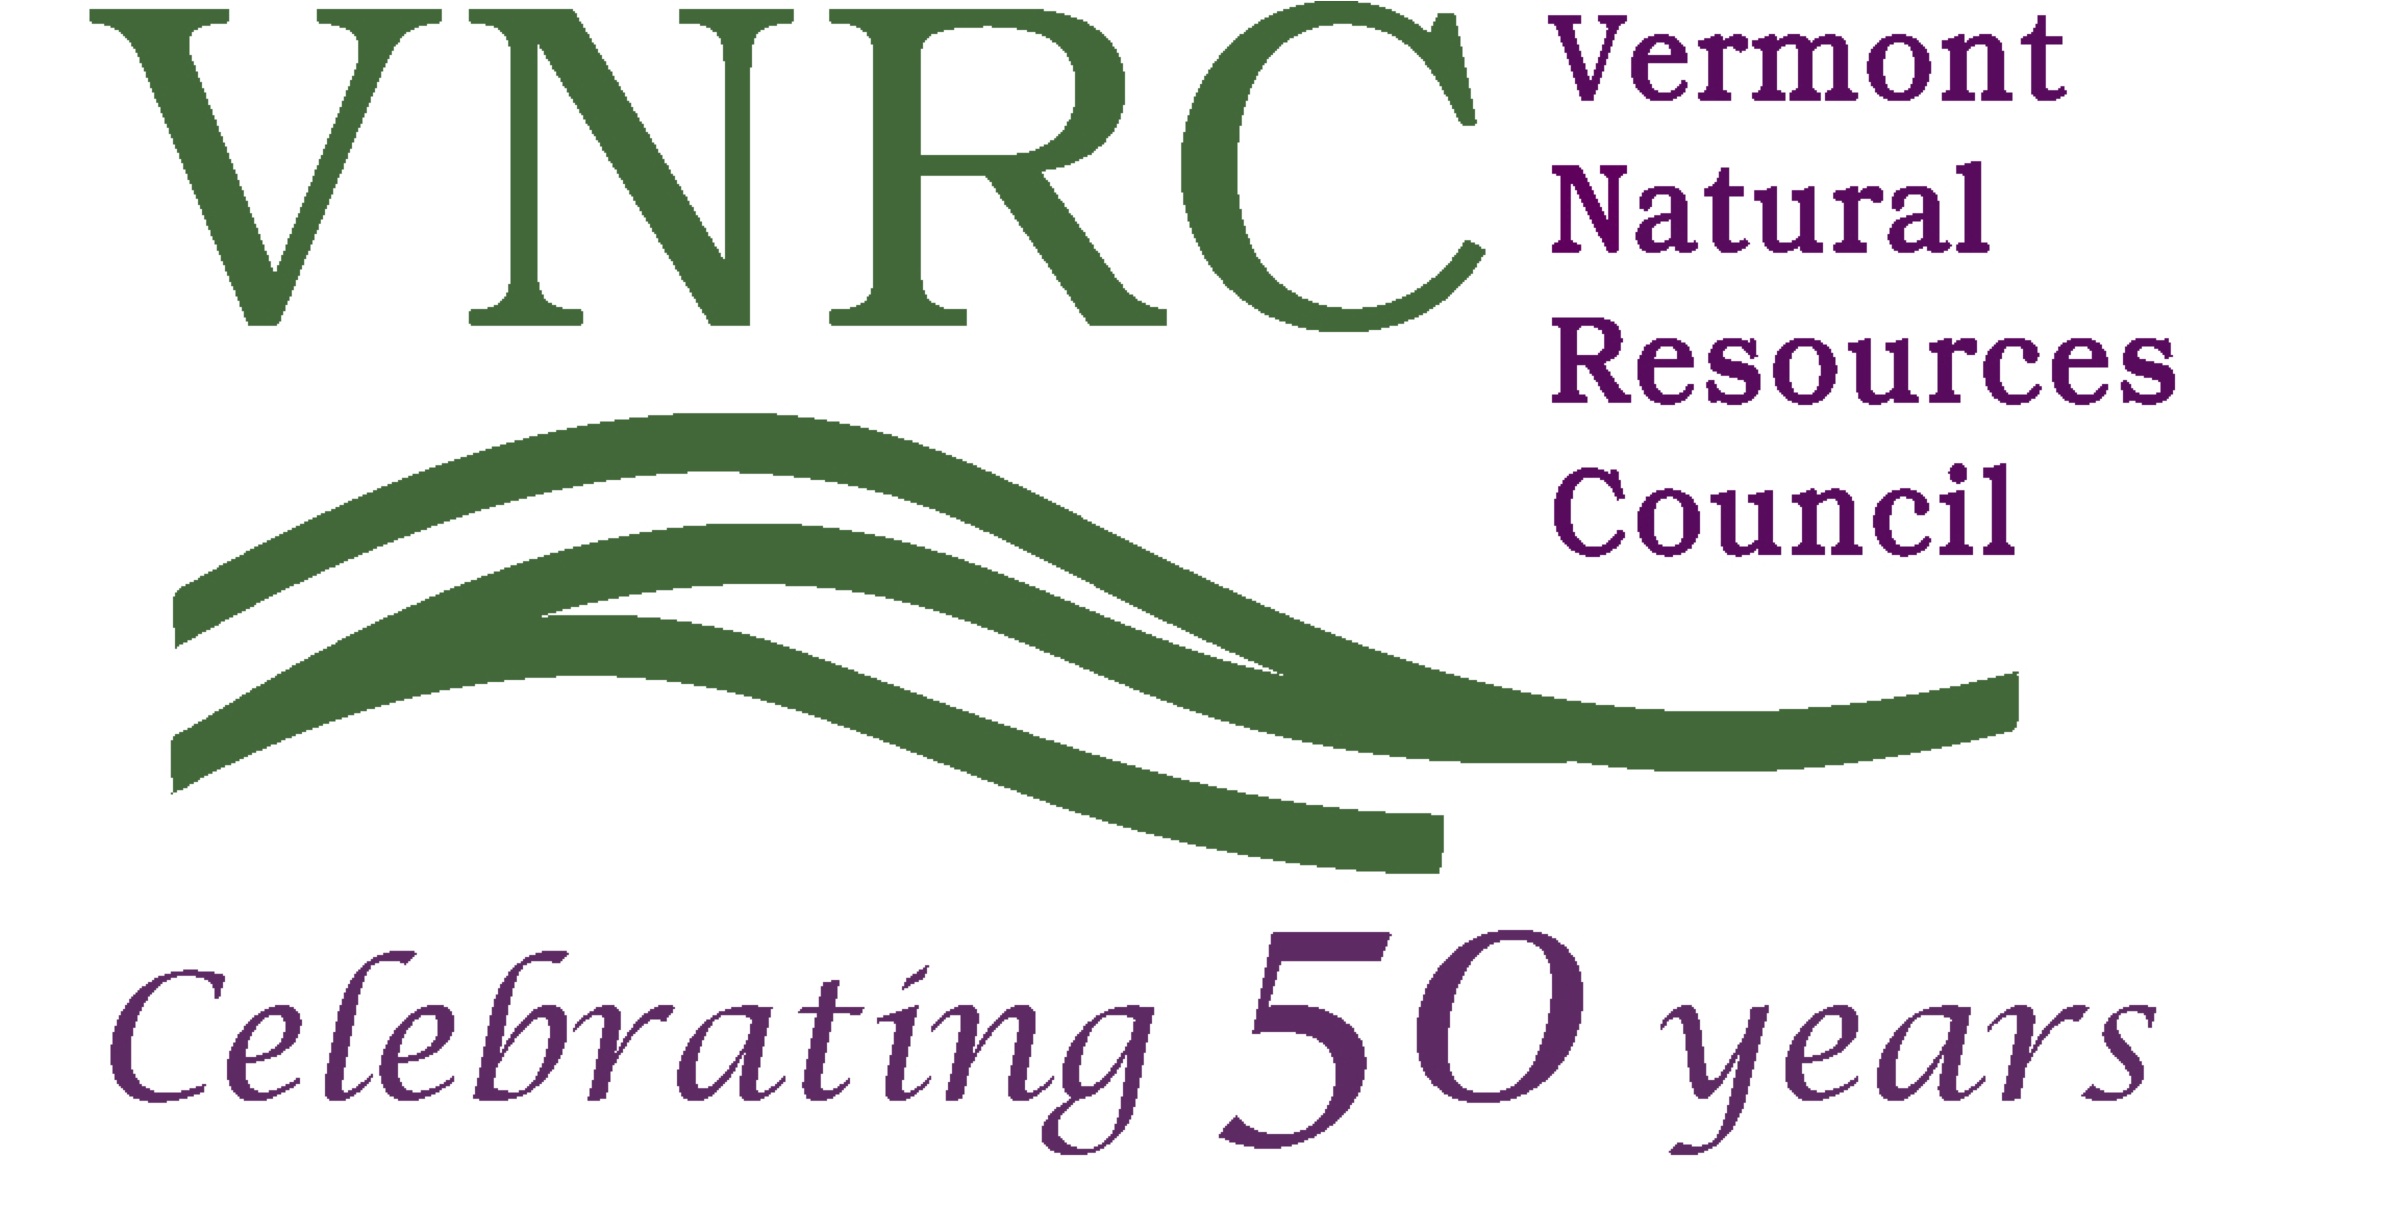 Vermont Natural Resources Council Is Part of Americans Against Fracking